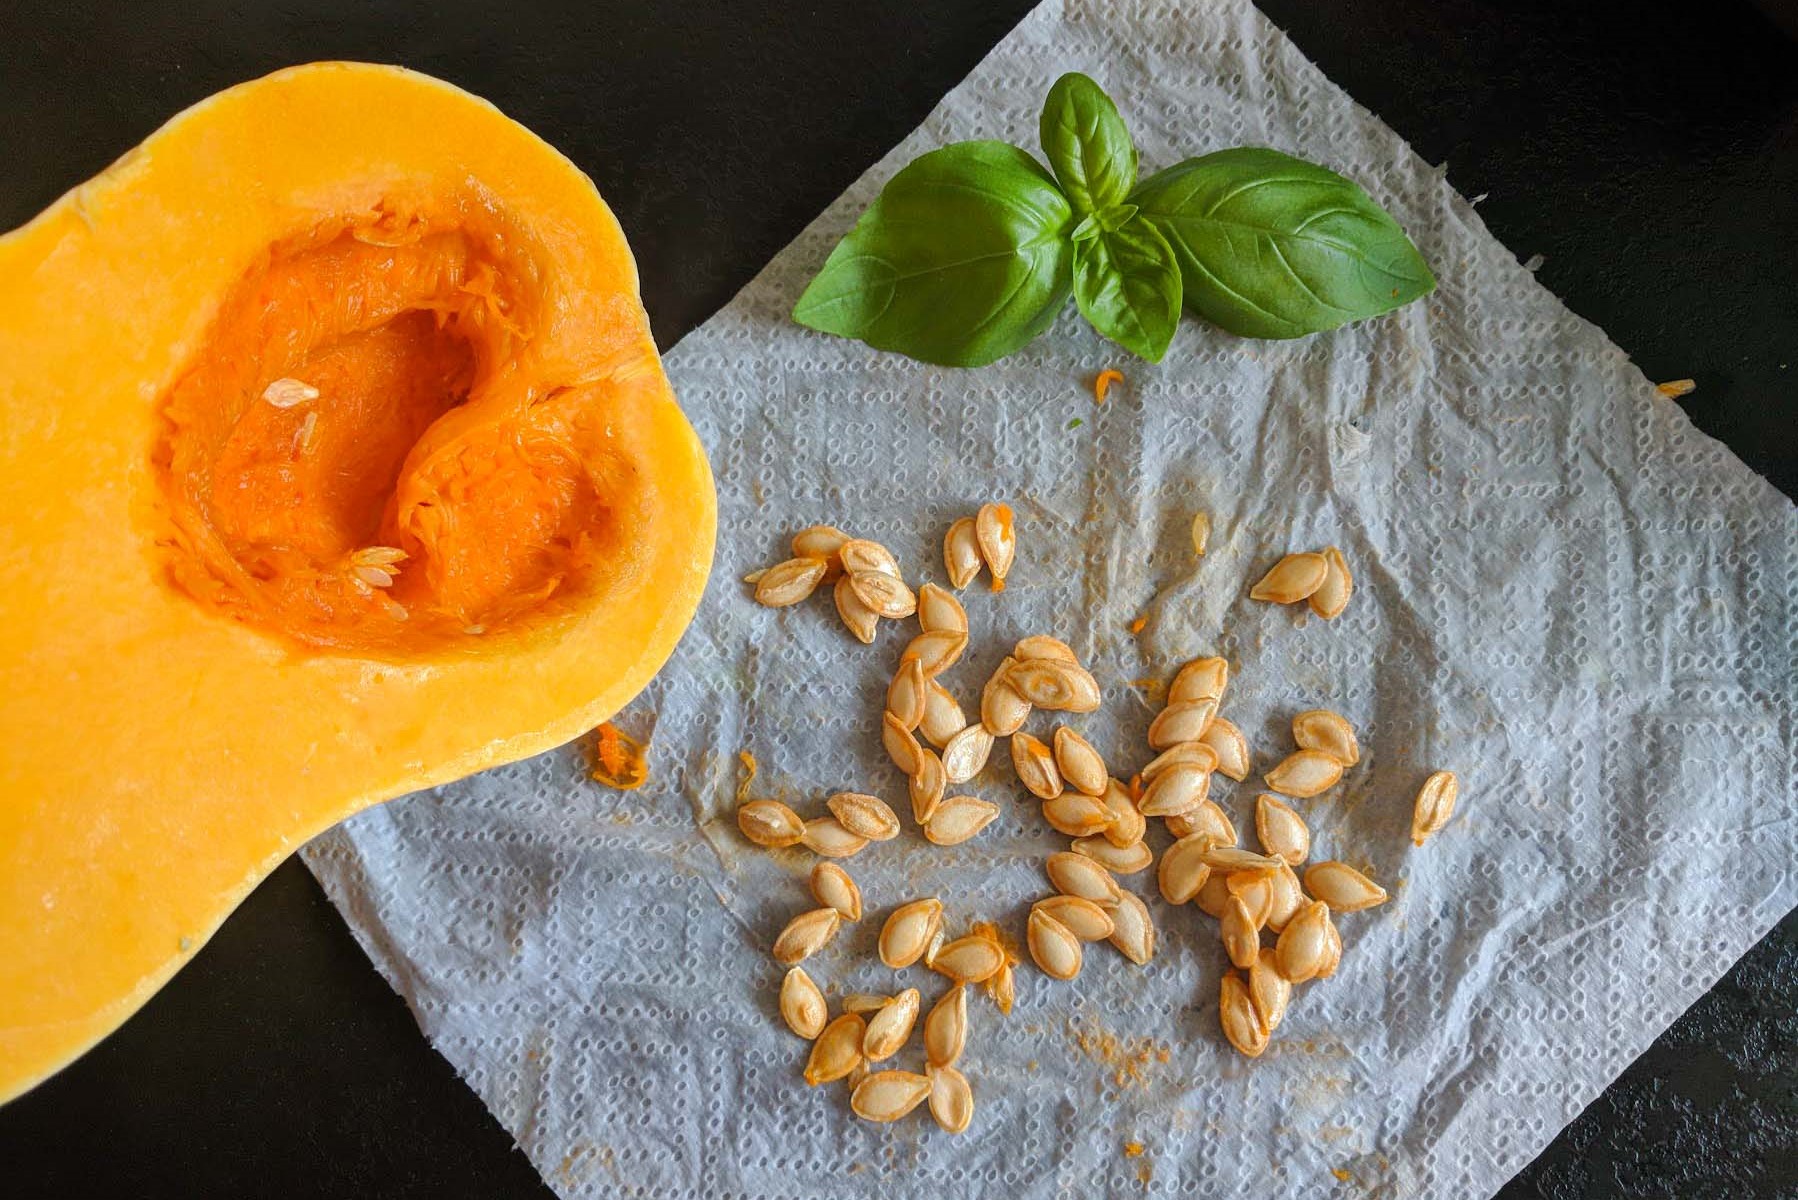 How to harvest and use the seeds from pumpkin